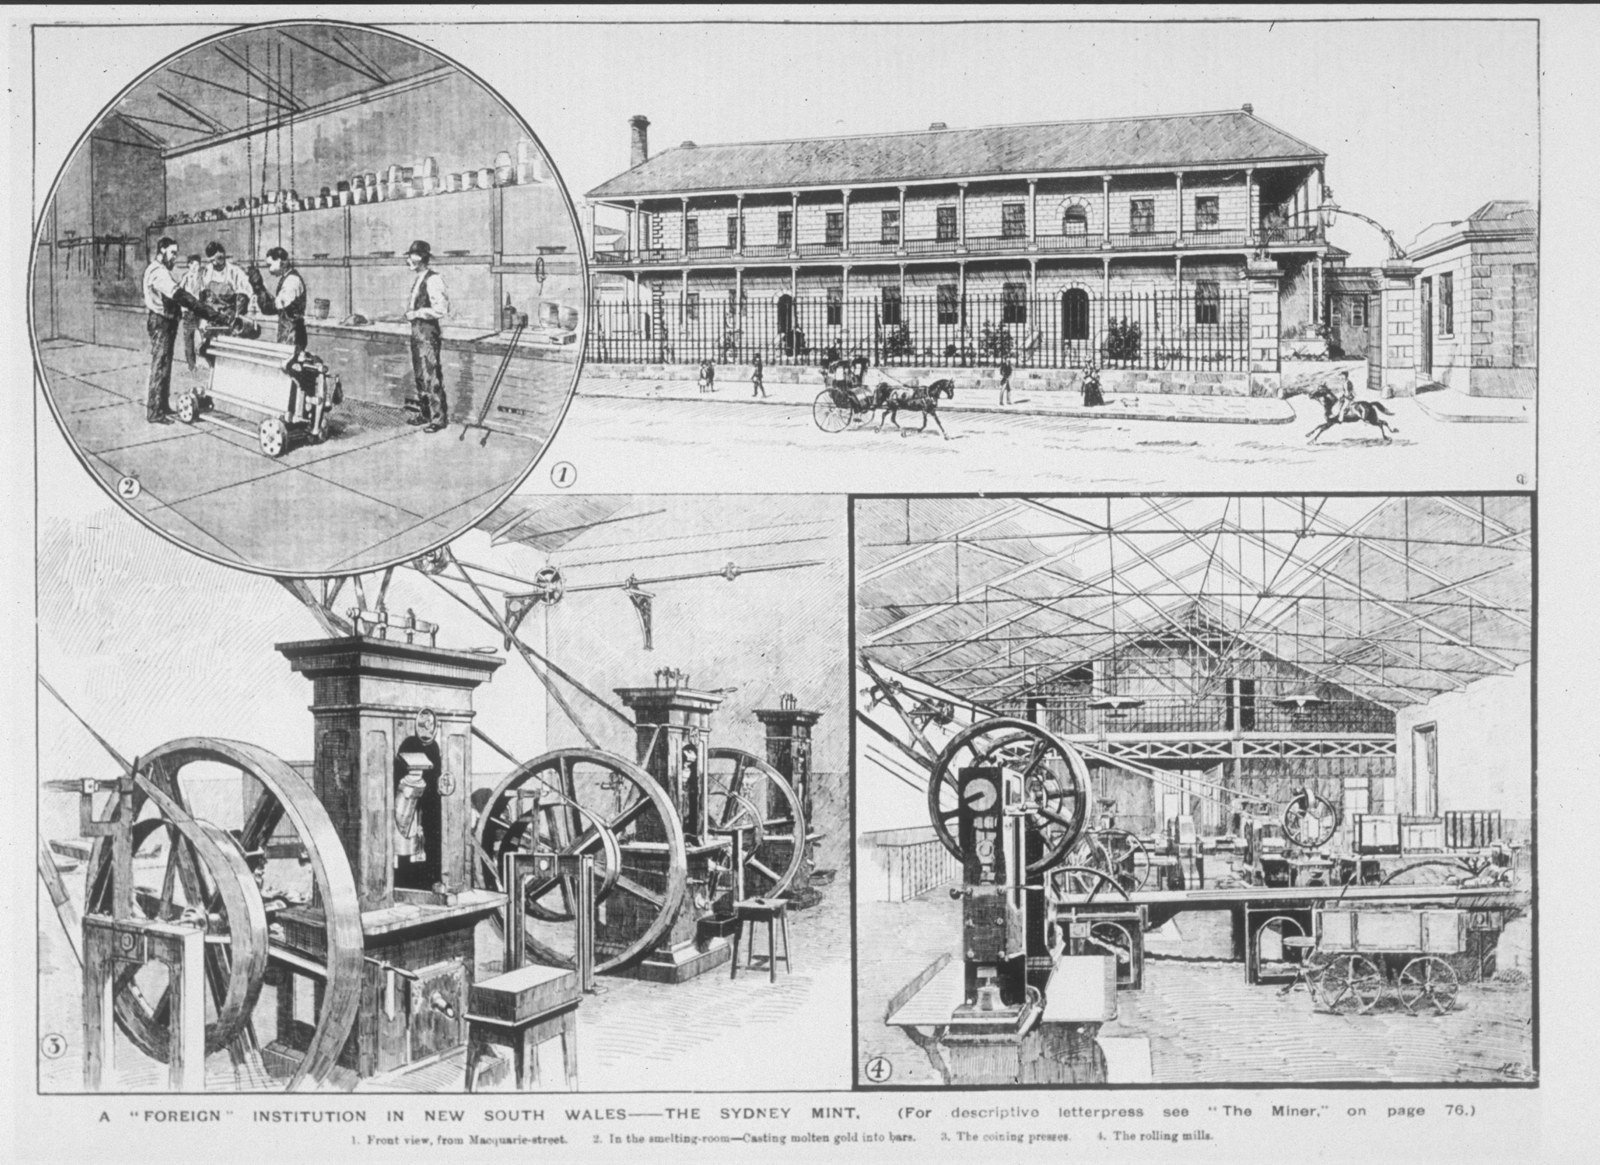 Series of B/W illustrations of metal rolling and coin pressing machinary and an exterior view of a large 2 storey verandah building with workers.